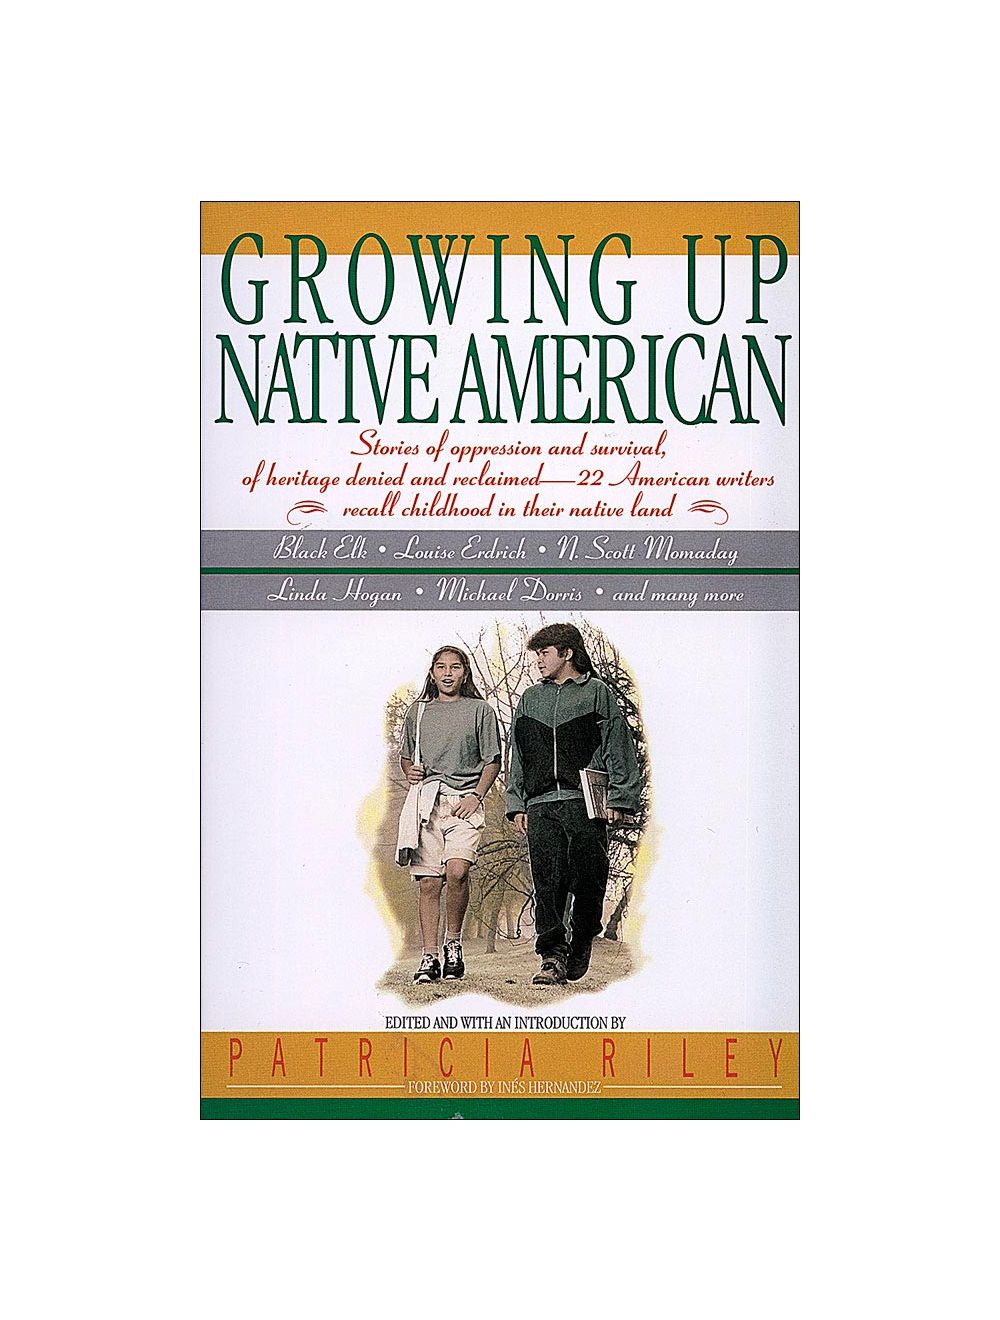 what is the thesis of growing up native